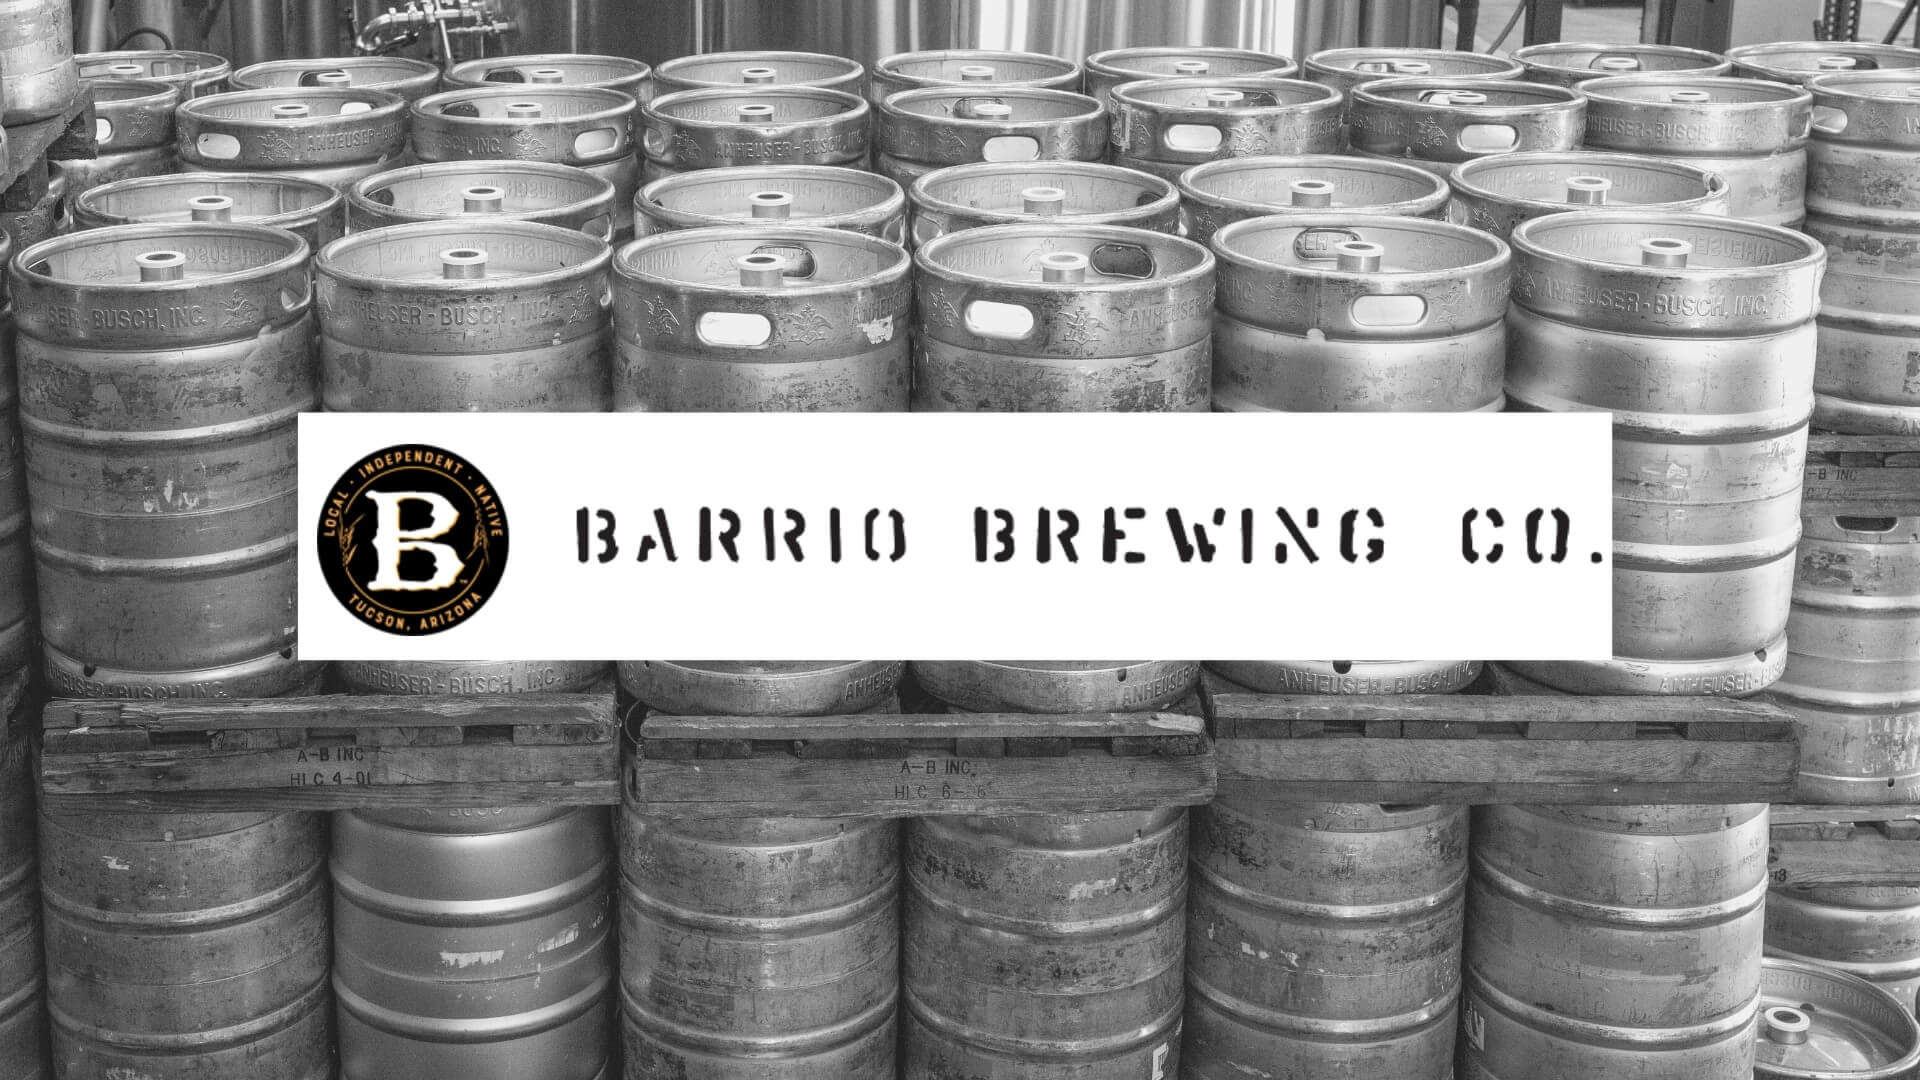 Perfect Christmas Gift: Barrio Brewing Company’s Employees Get Ownership of the Company